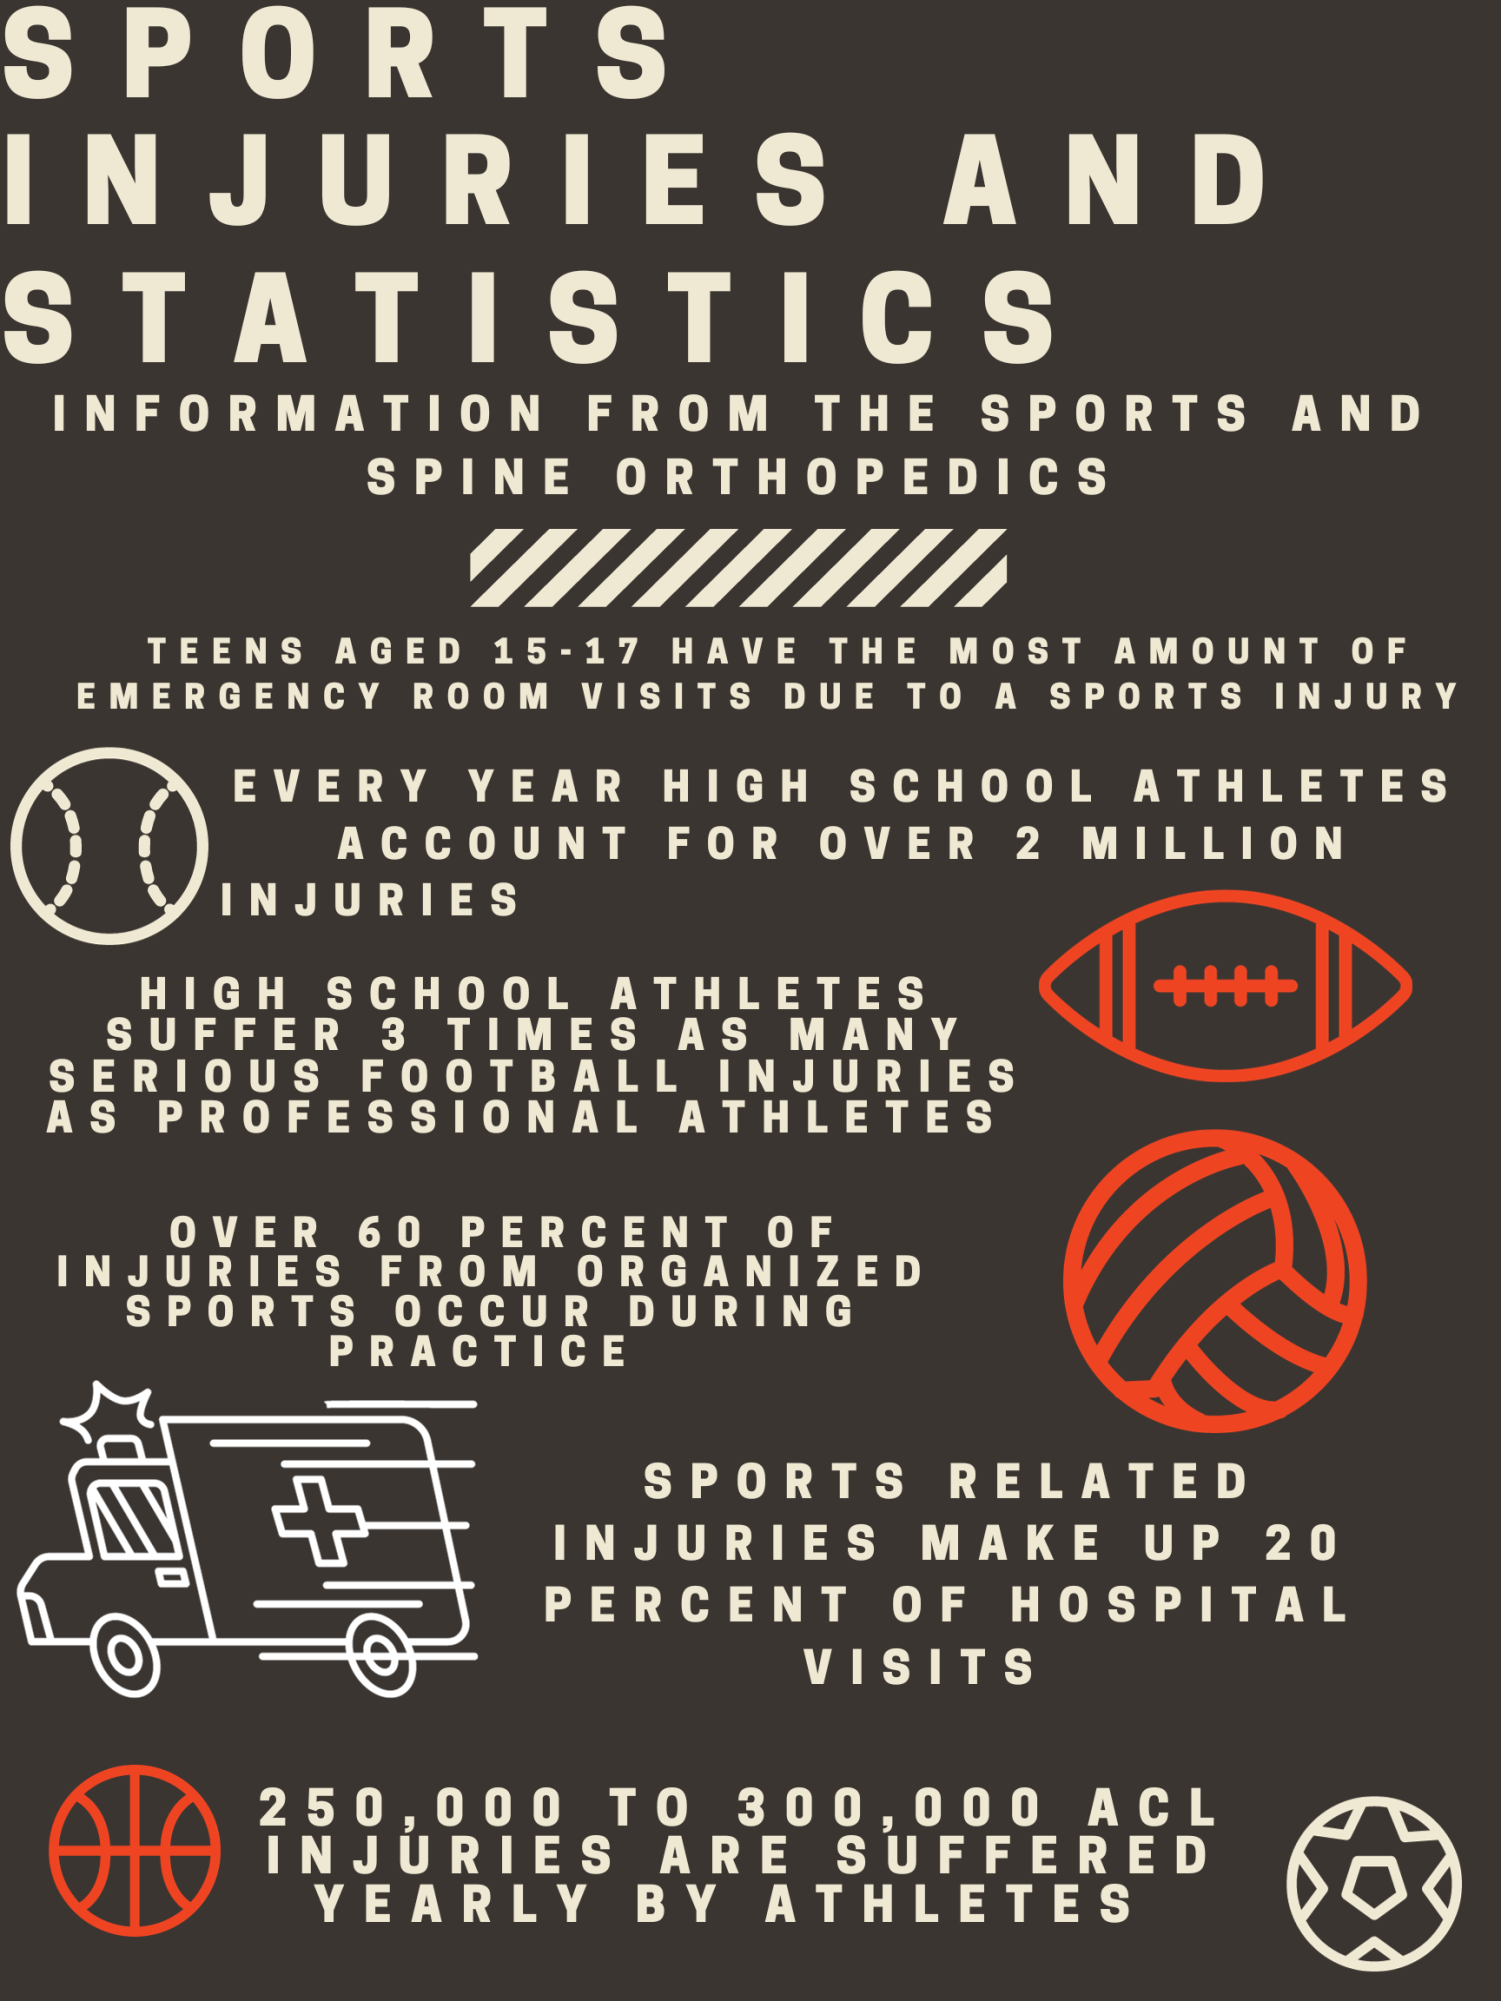 Is playing sports year round causing more injuries ?